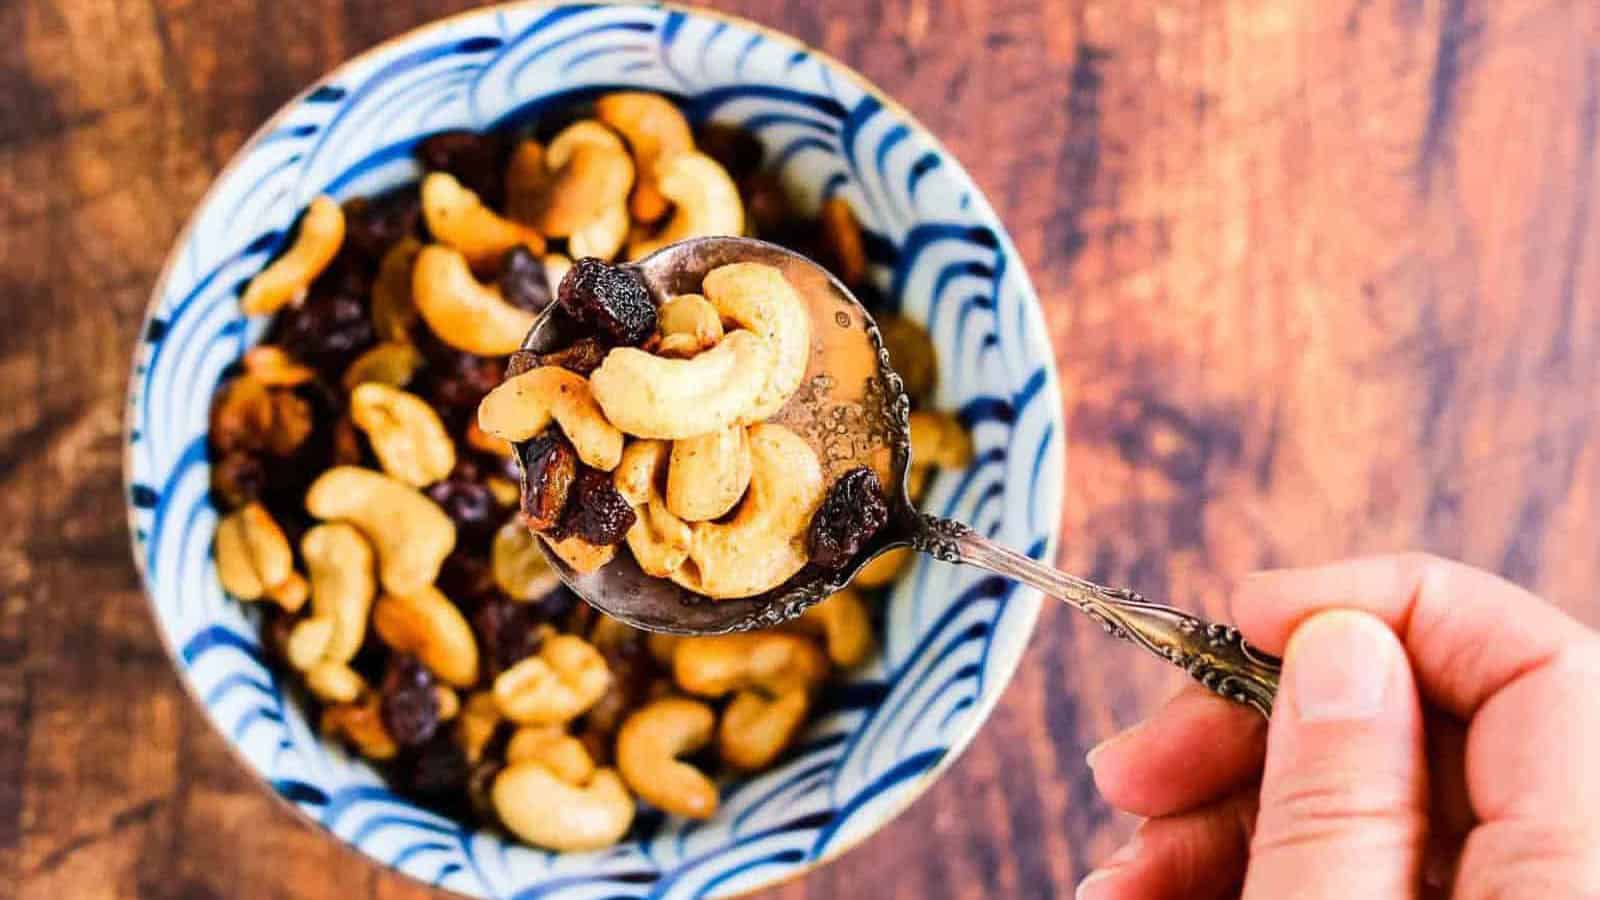 Caramelized cashews and raisins in a bowl with a silver spoon being lifted.